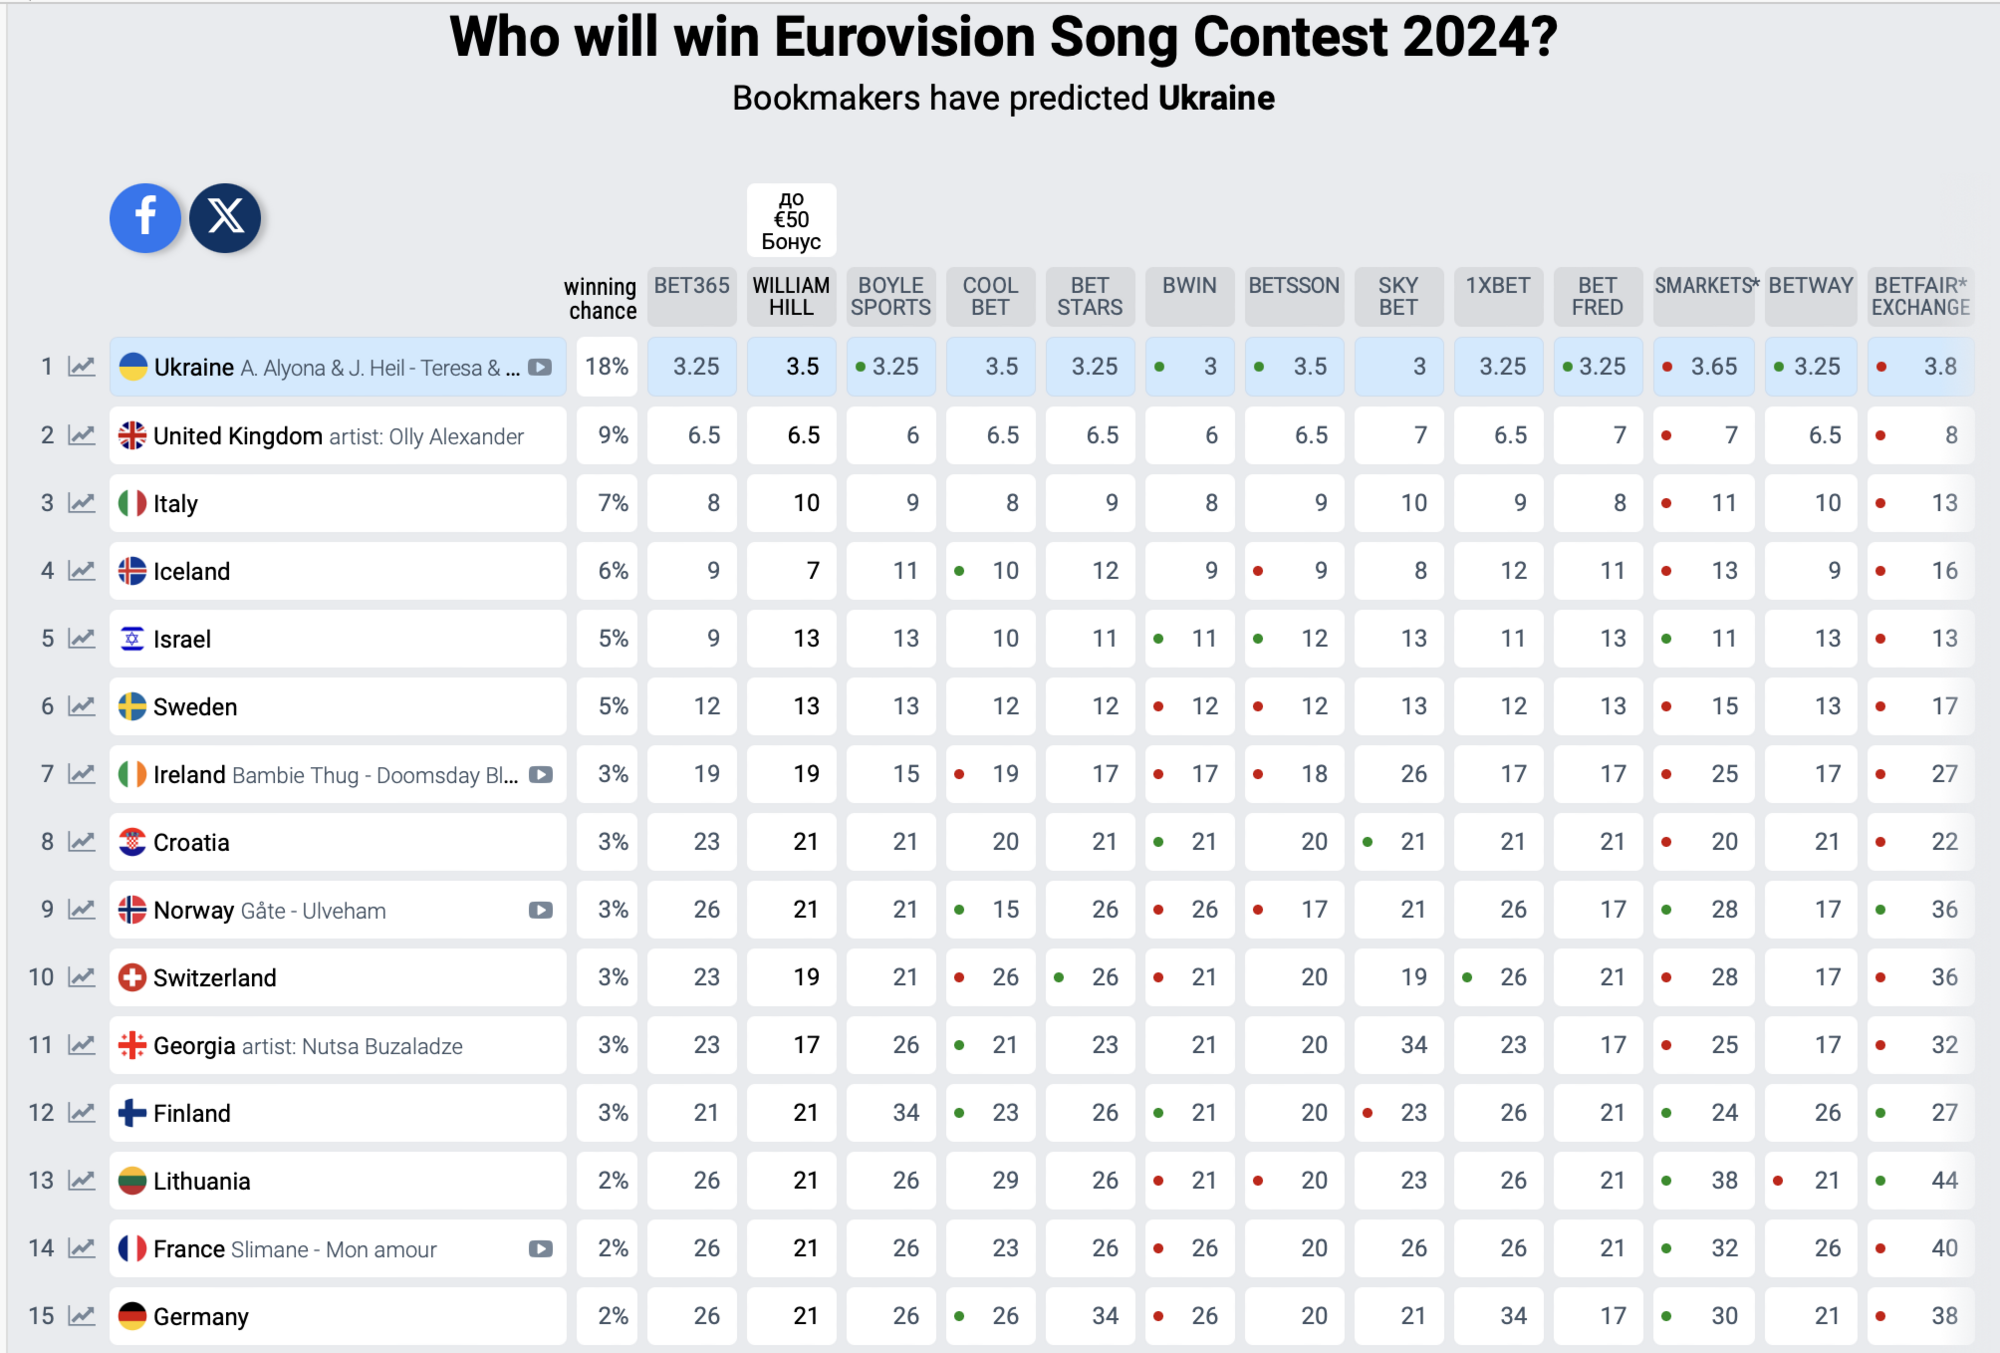 Already twice as much: bookmakers increase Ukraine's chances of winning Eurovision 2024